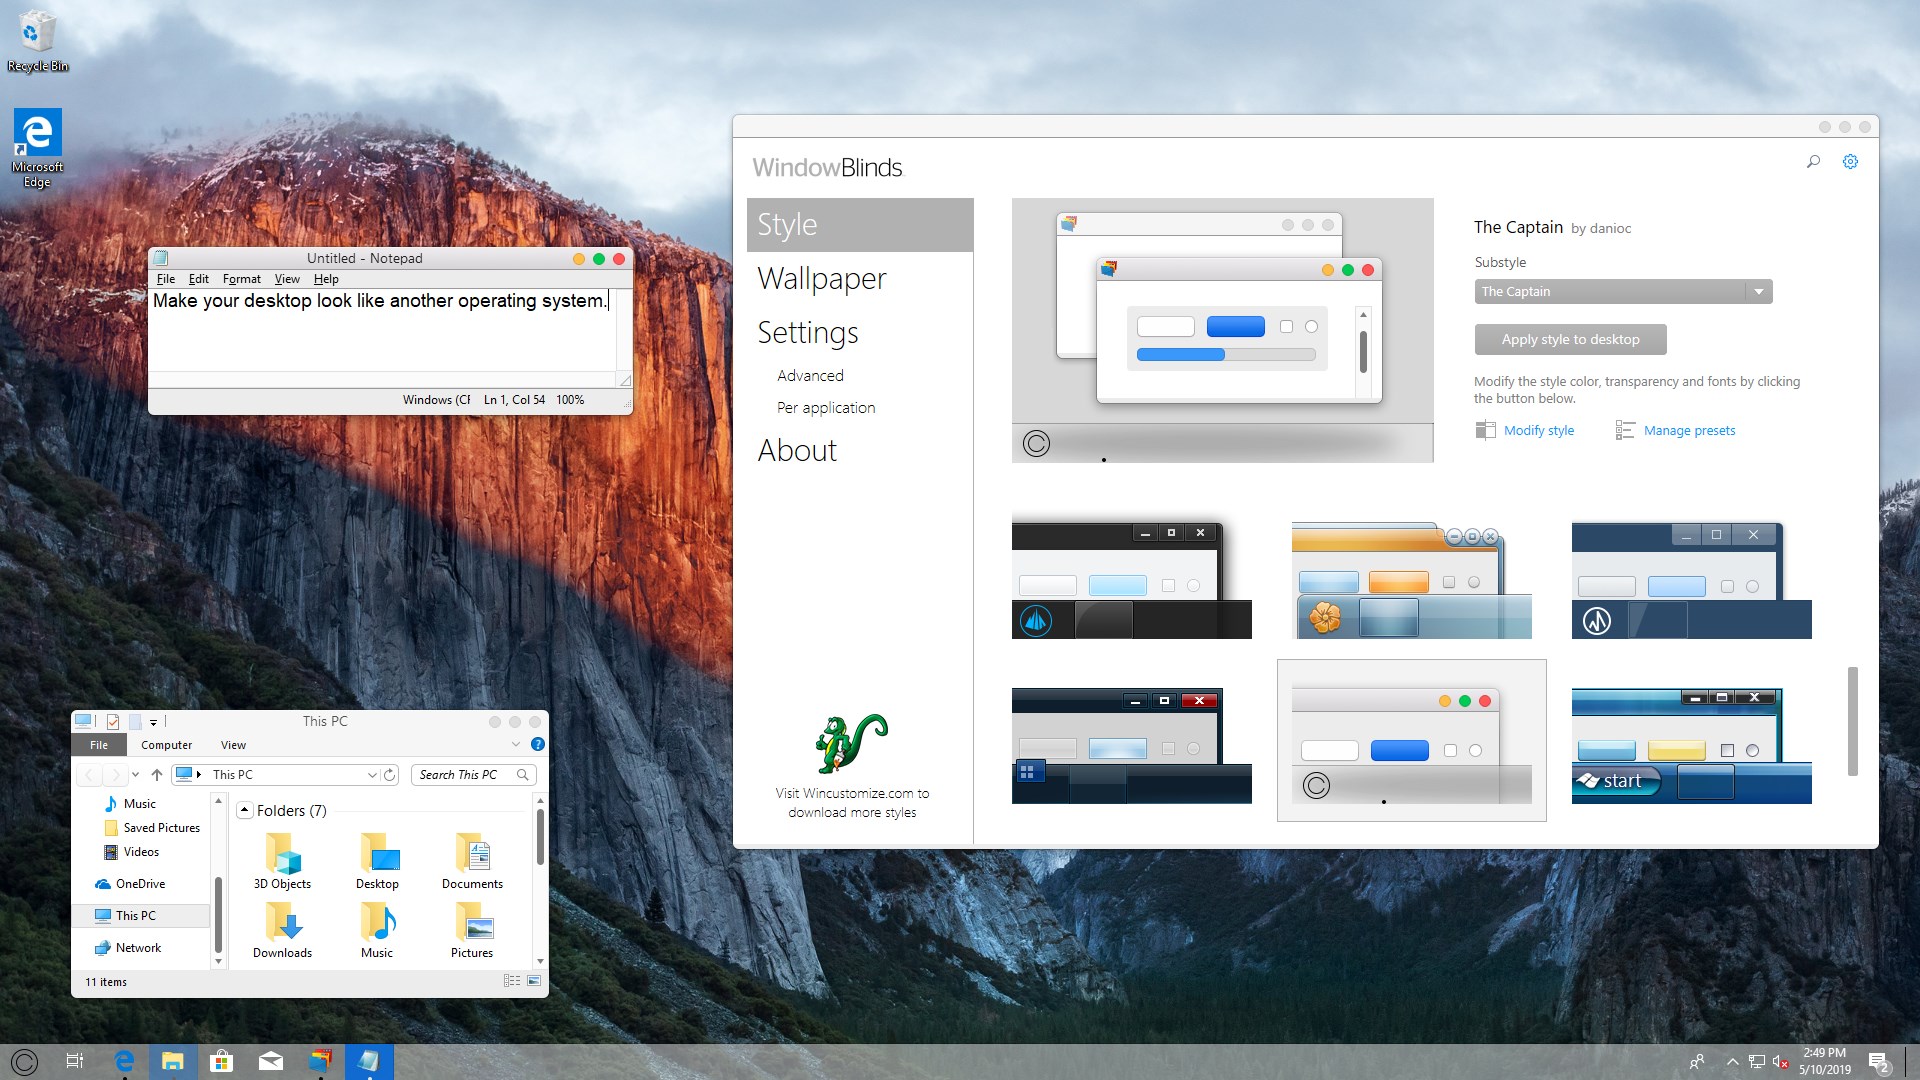 Make your desktop look like another operating system.